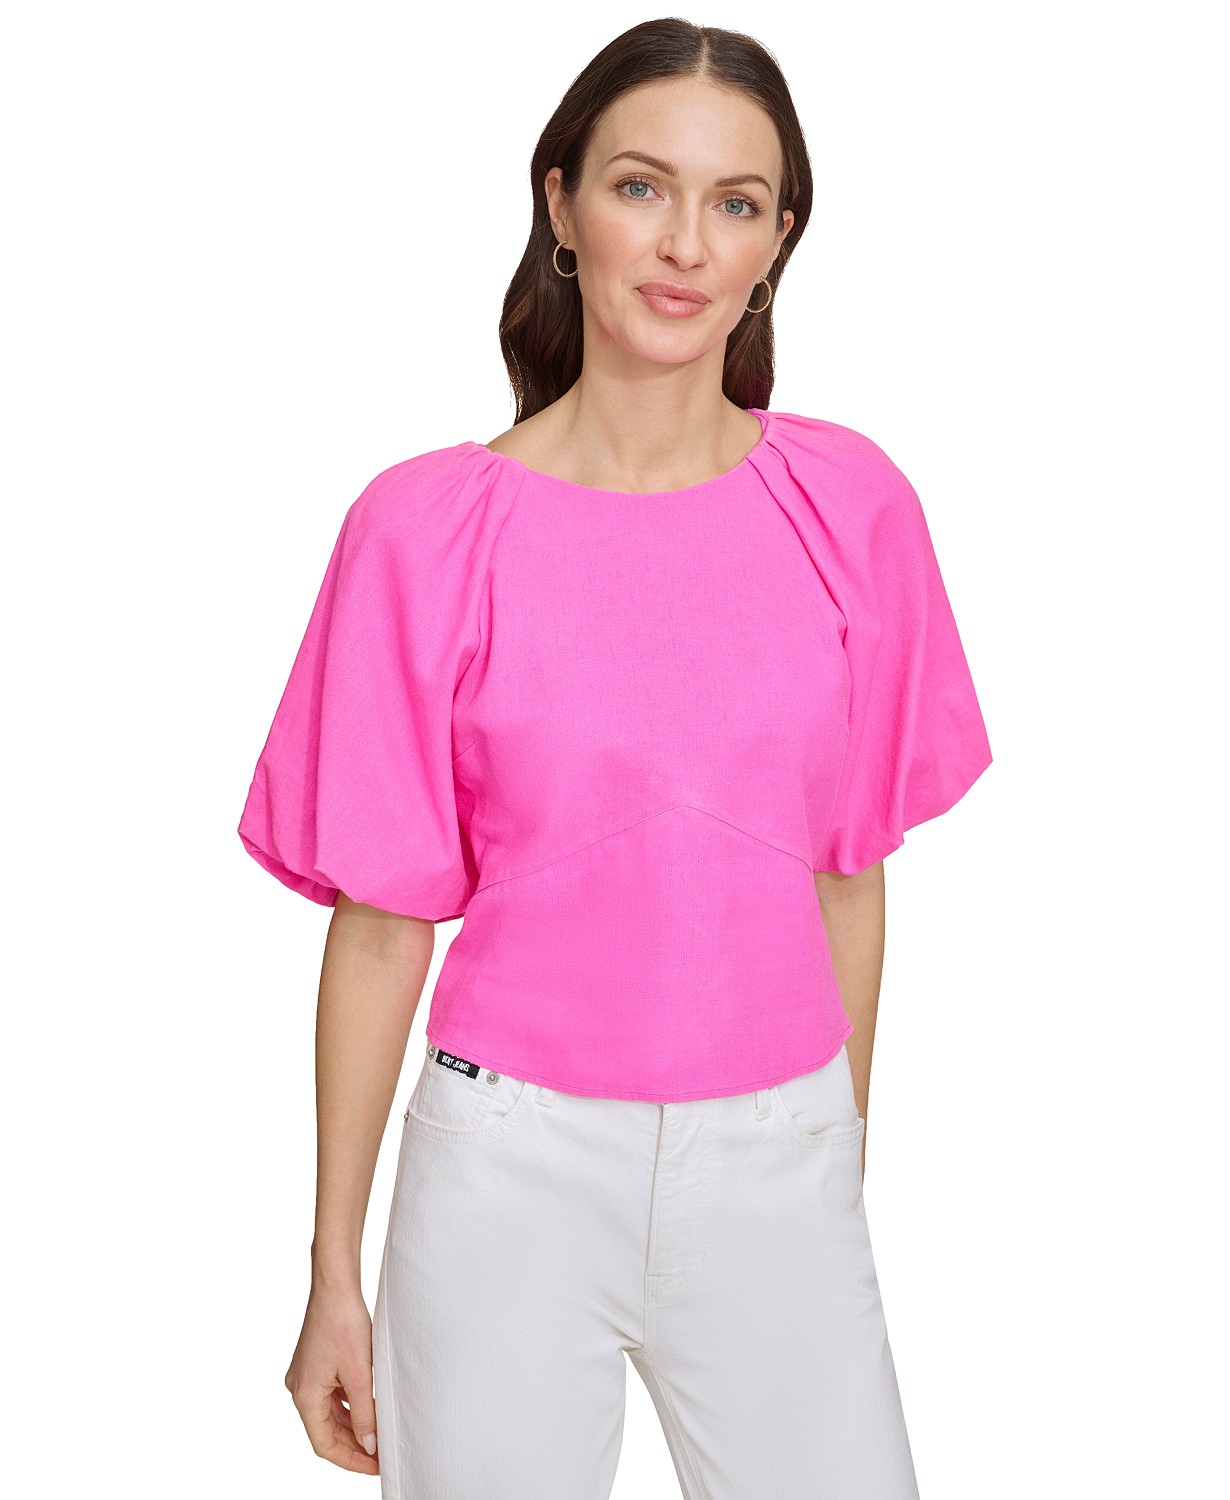 Womens Boat-Neck Short-Puff-Sleeve Top